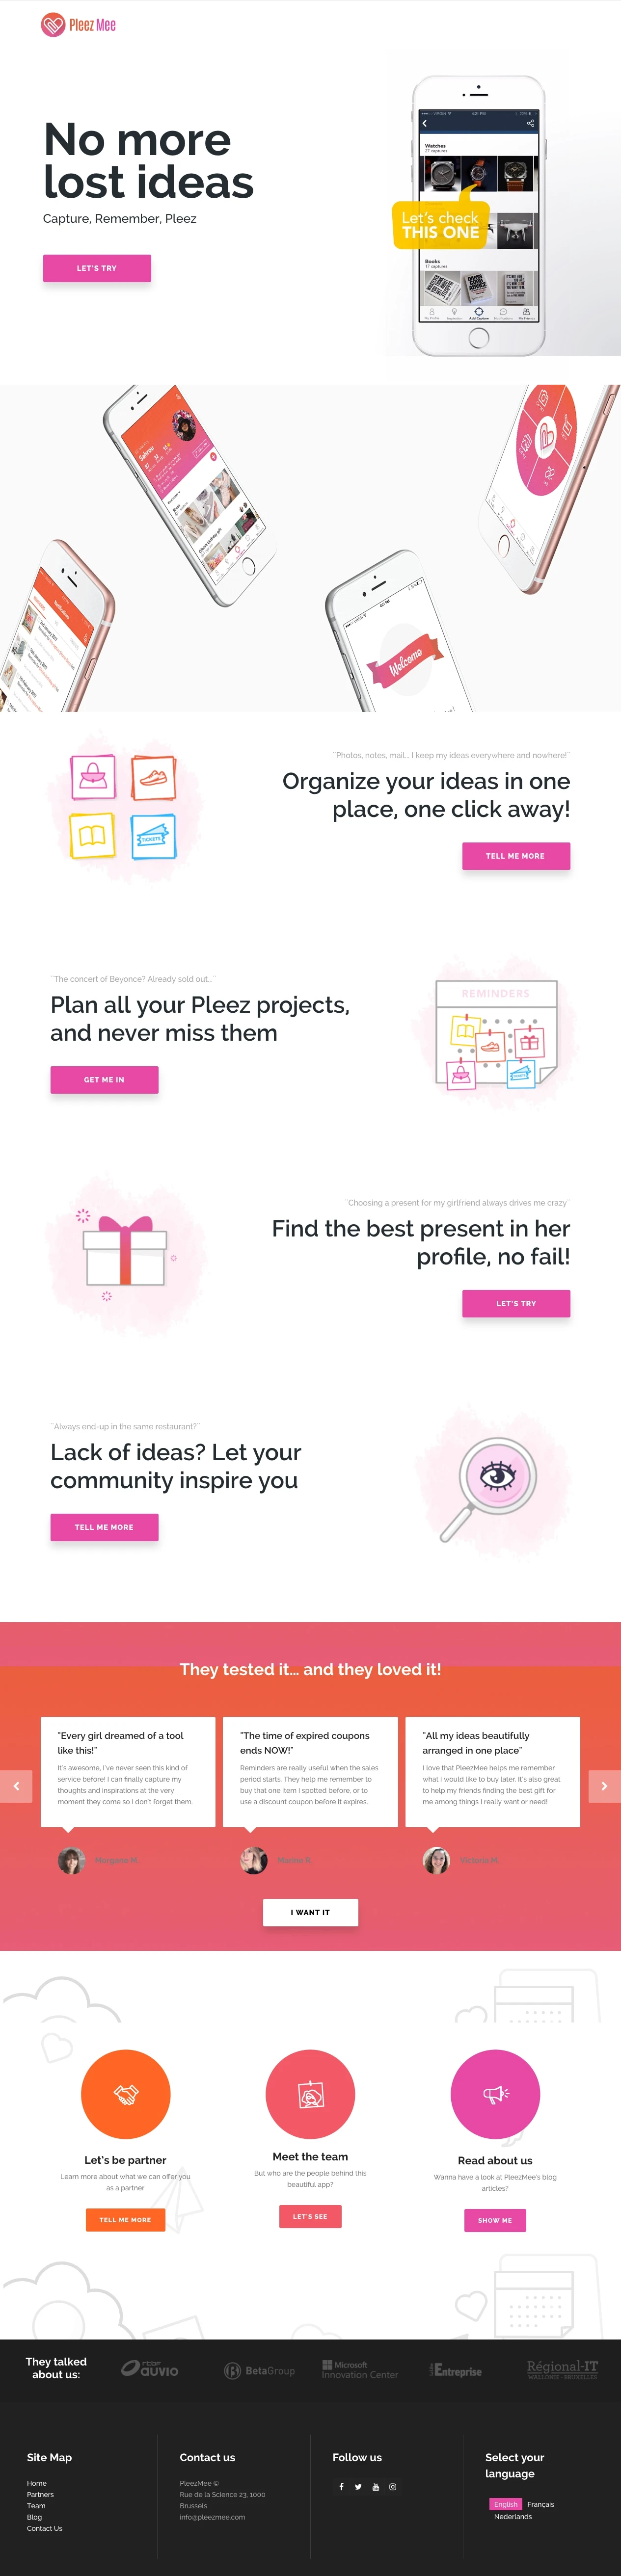 PleezMee Landing Page Example: Organize your ideas in one place, one click away!